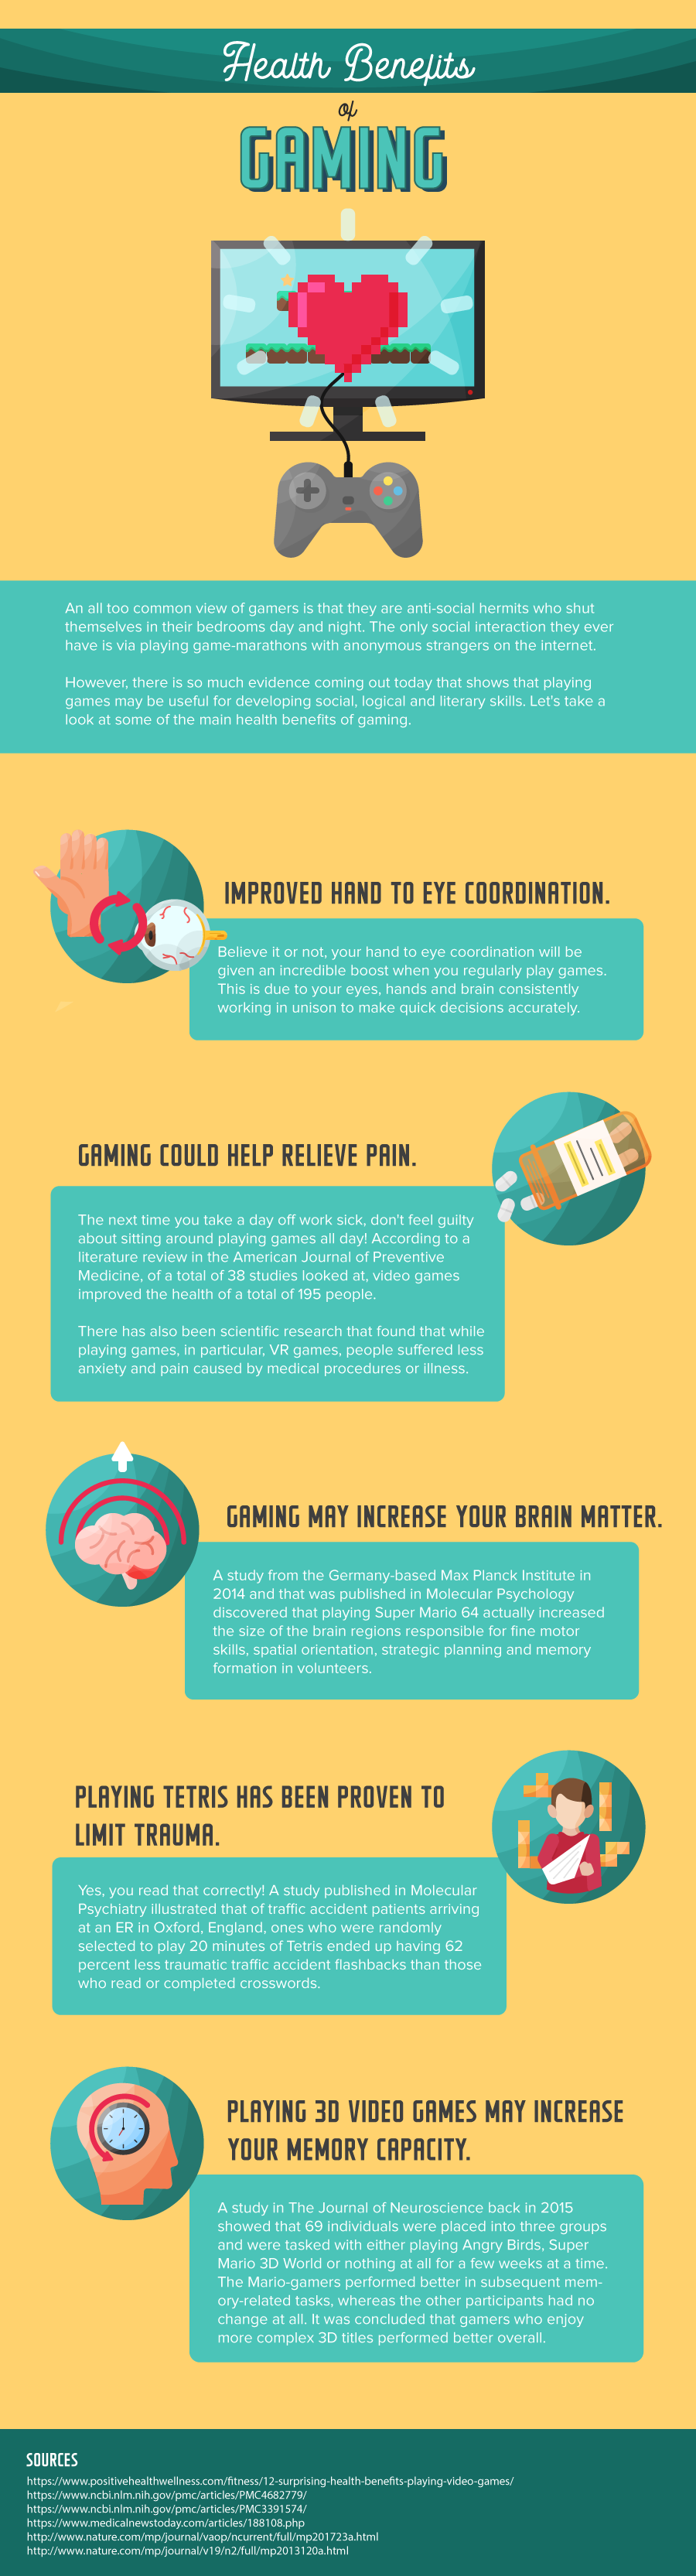 health-benefits-of-gaming